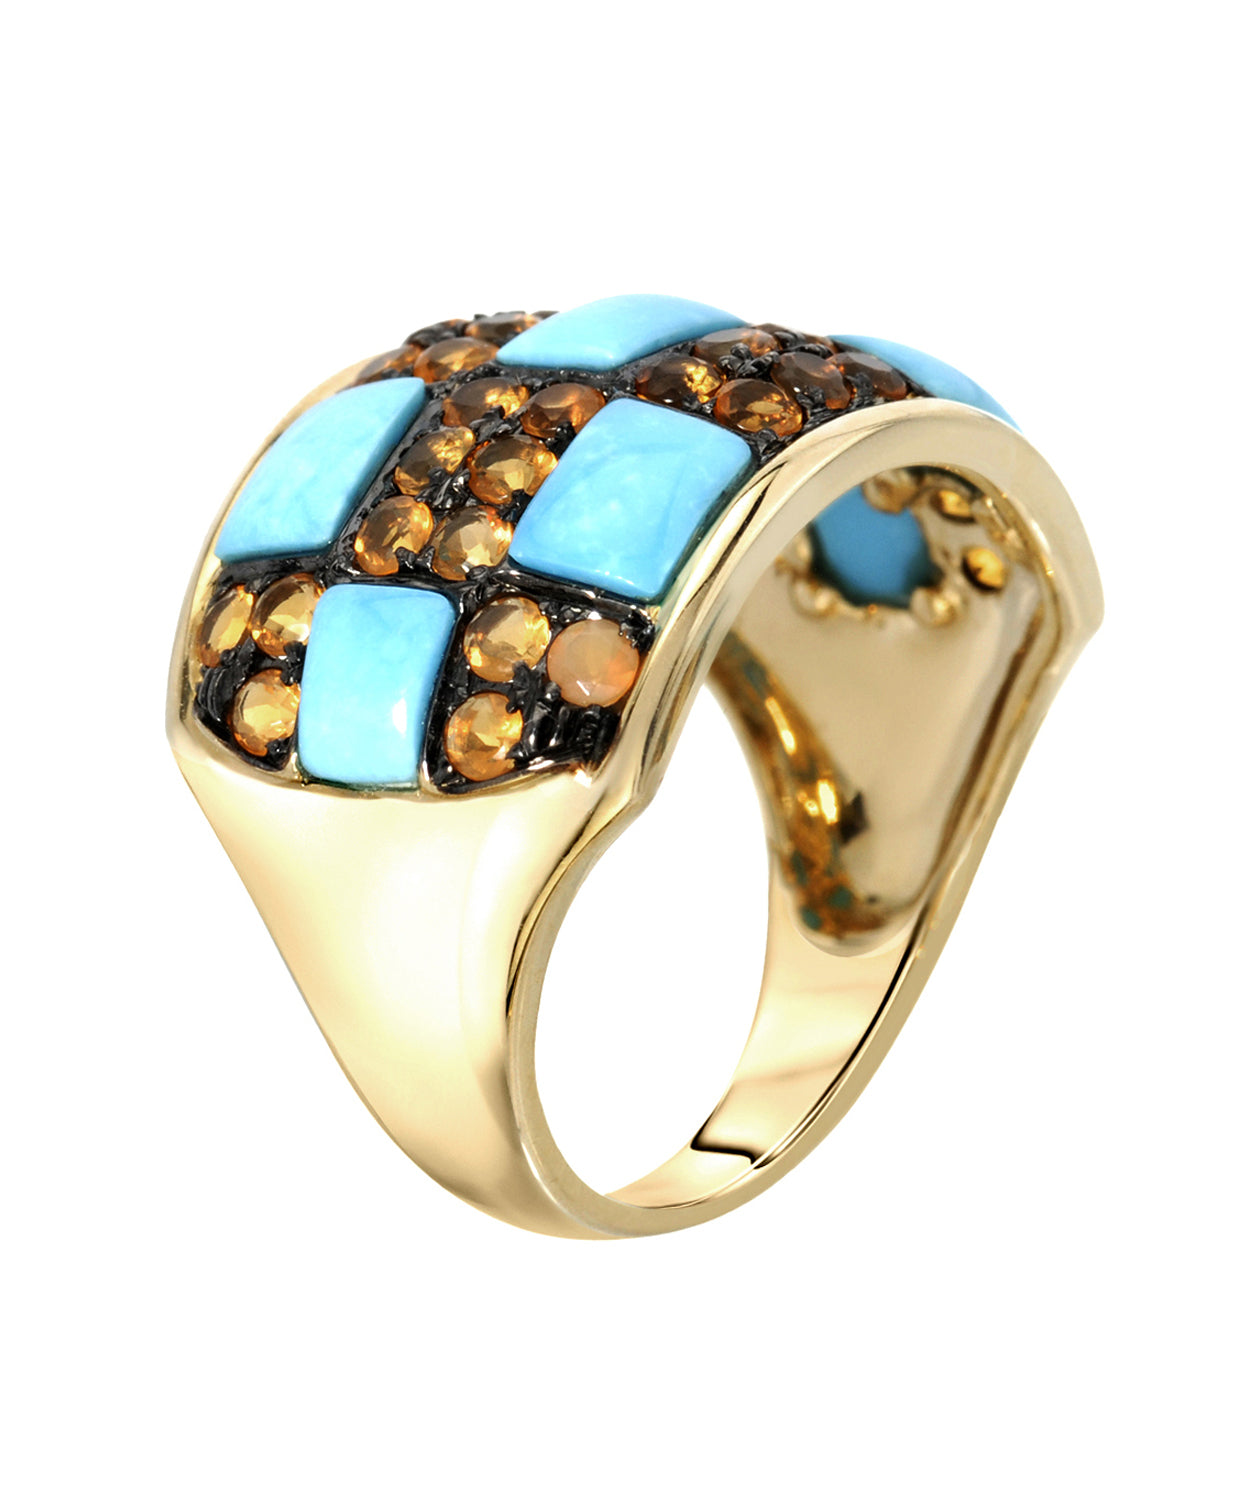 3.13 ctw Natural Turquoise and Fire Opal 14k Gold Ring View 2